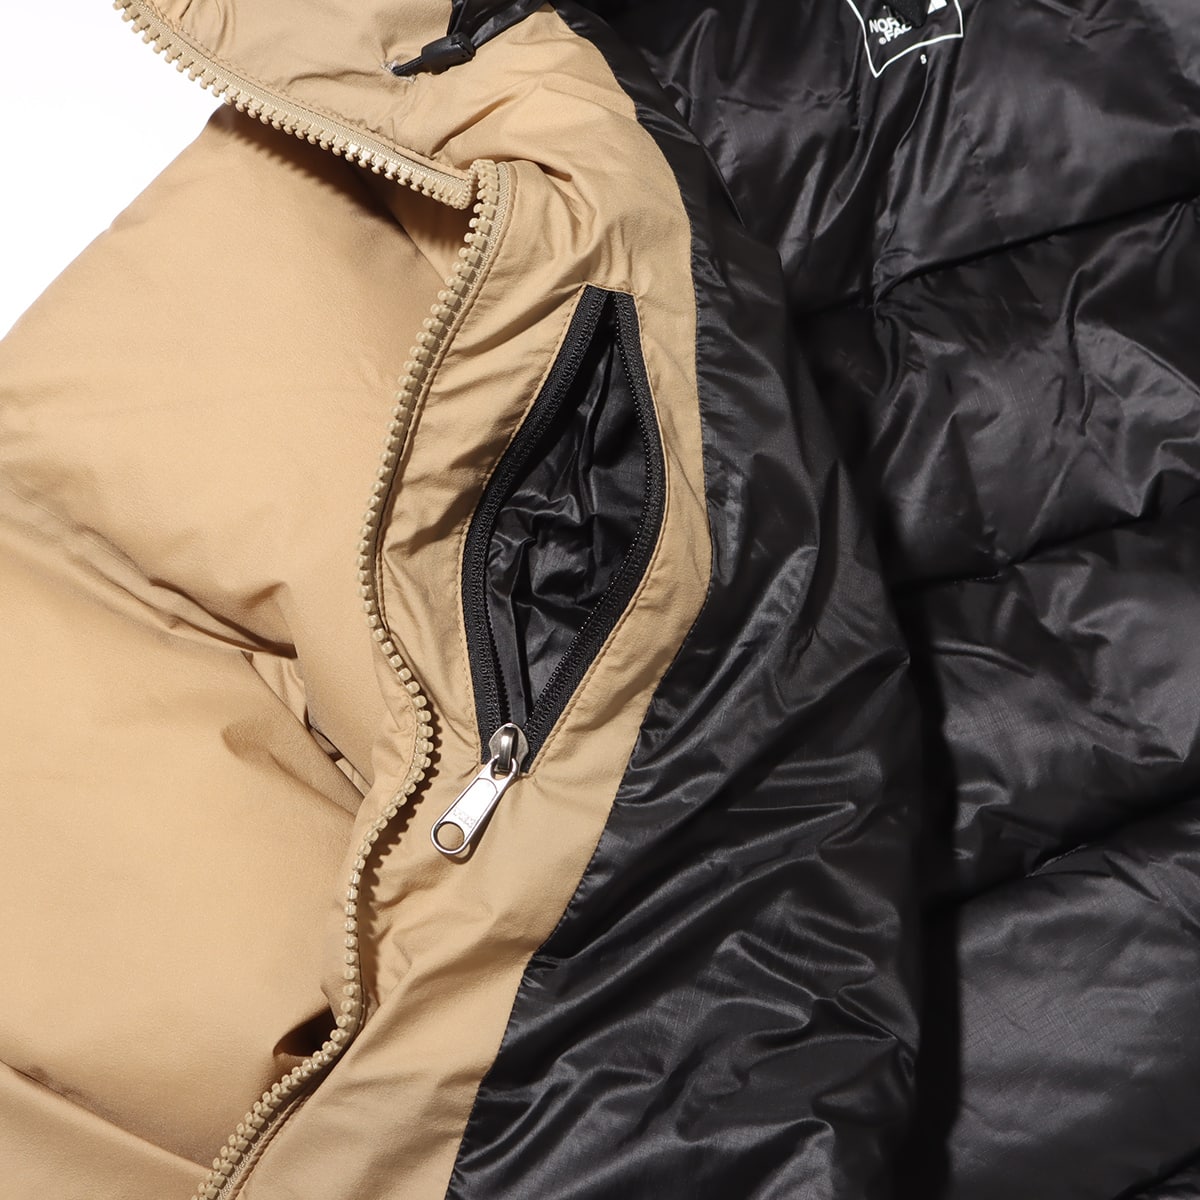 THE NORTH FACE BELAYER PARKA ケプルタン 23FW-I